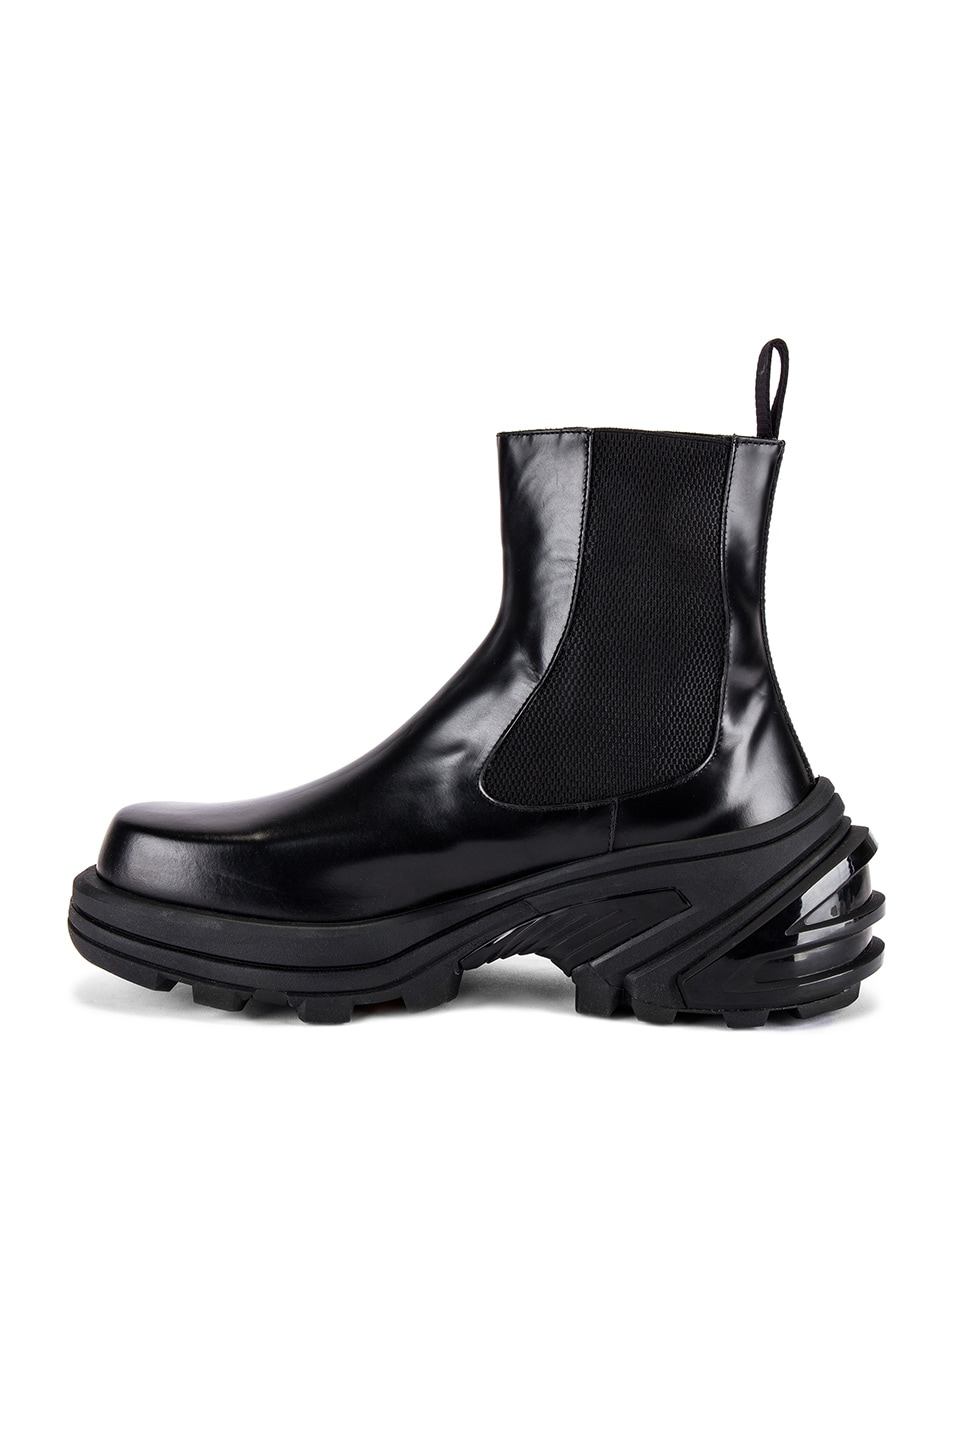 1017 ALYX 9SM Chelsea Boots With Removable Vibram Sole Var. 2 in Black ...